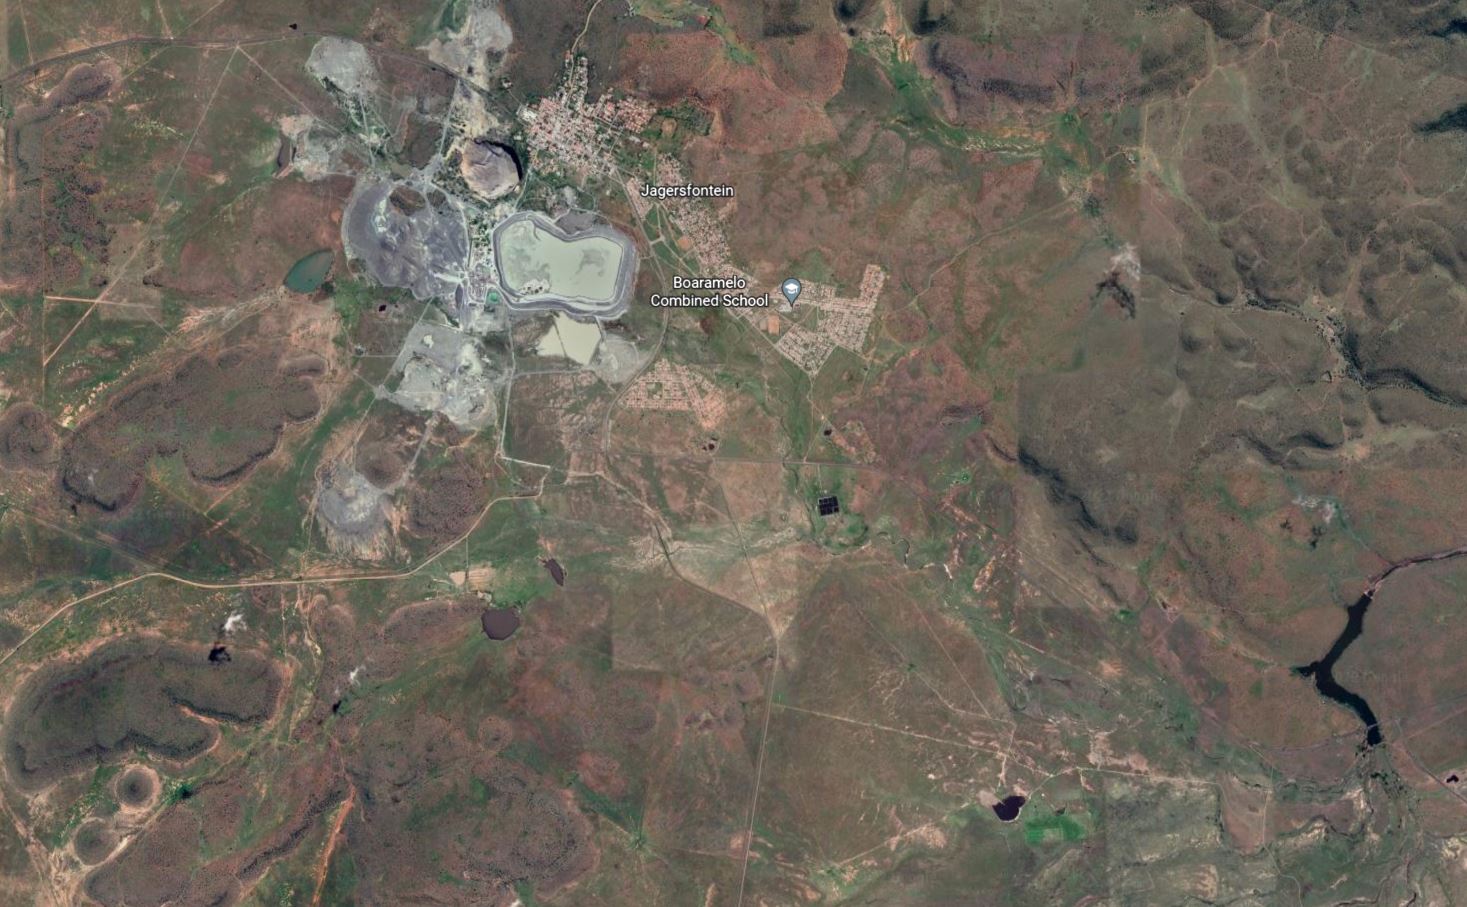 Google Earth image of the Jagersfontein site, including the tailings facility that failed in September 2022.